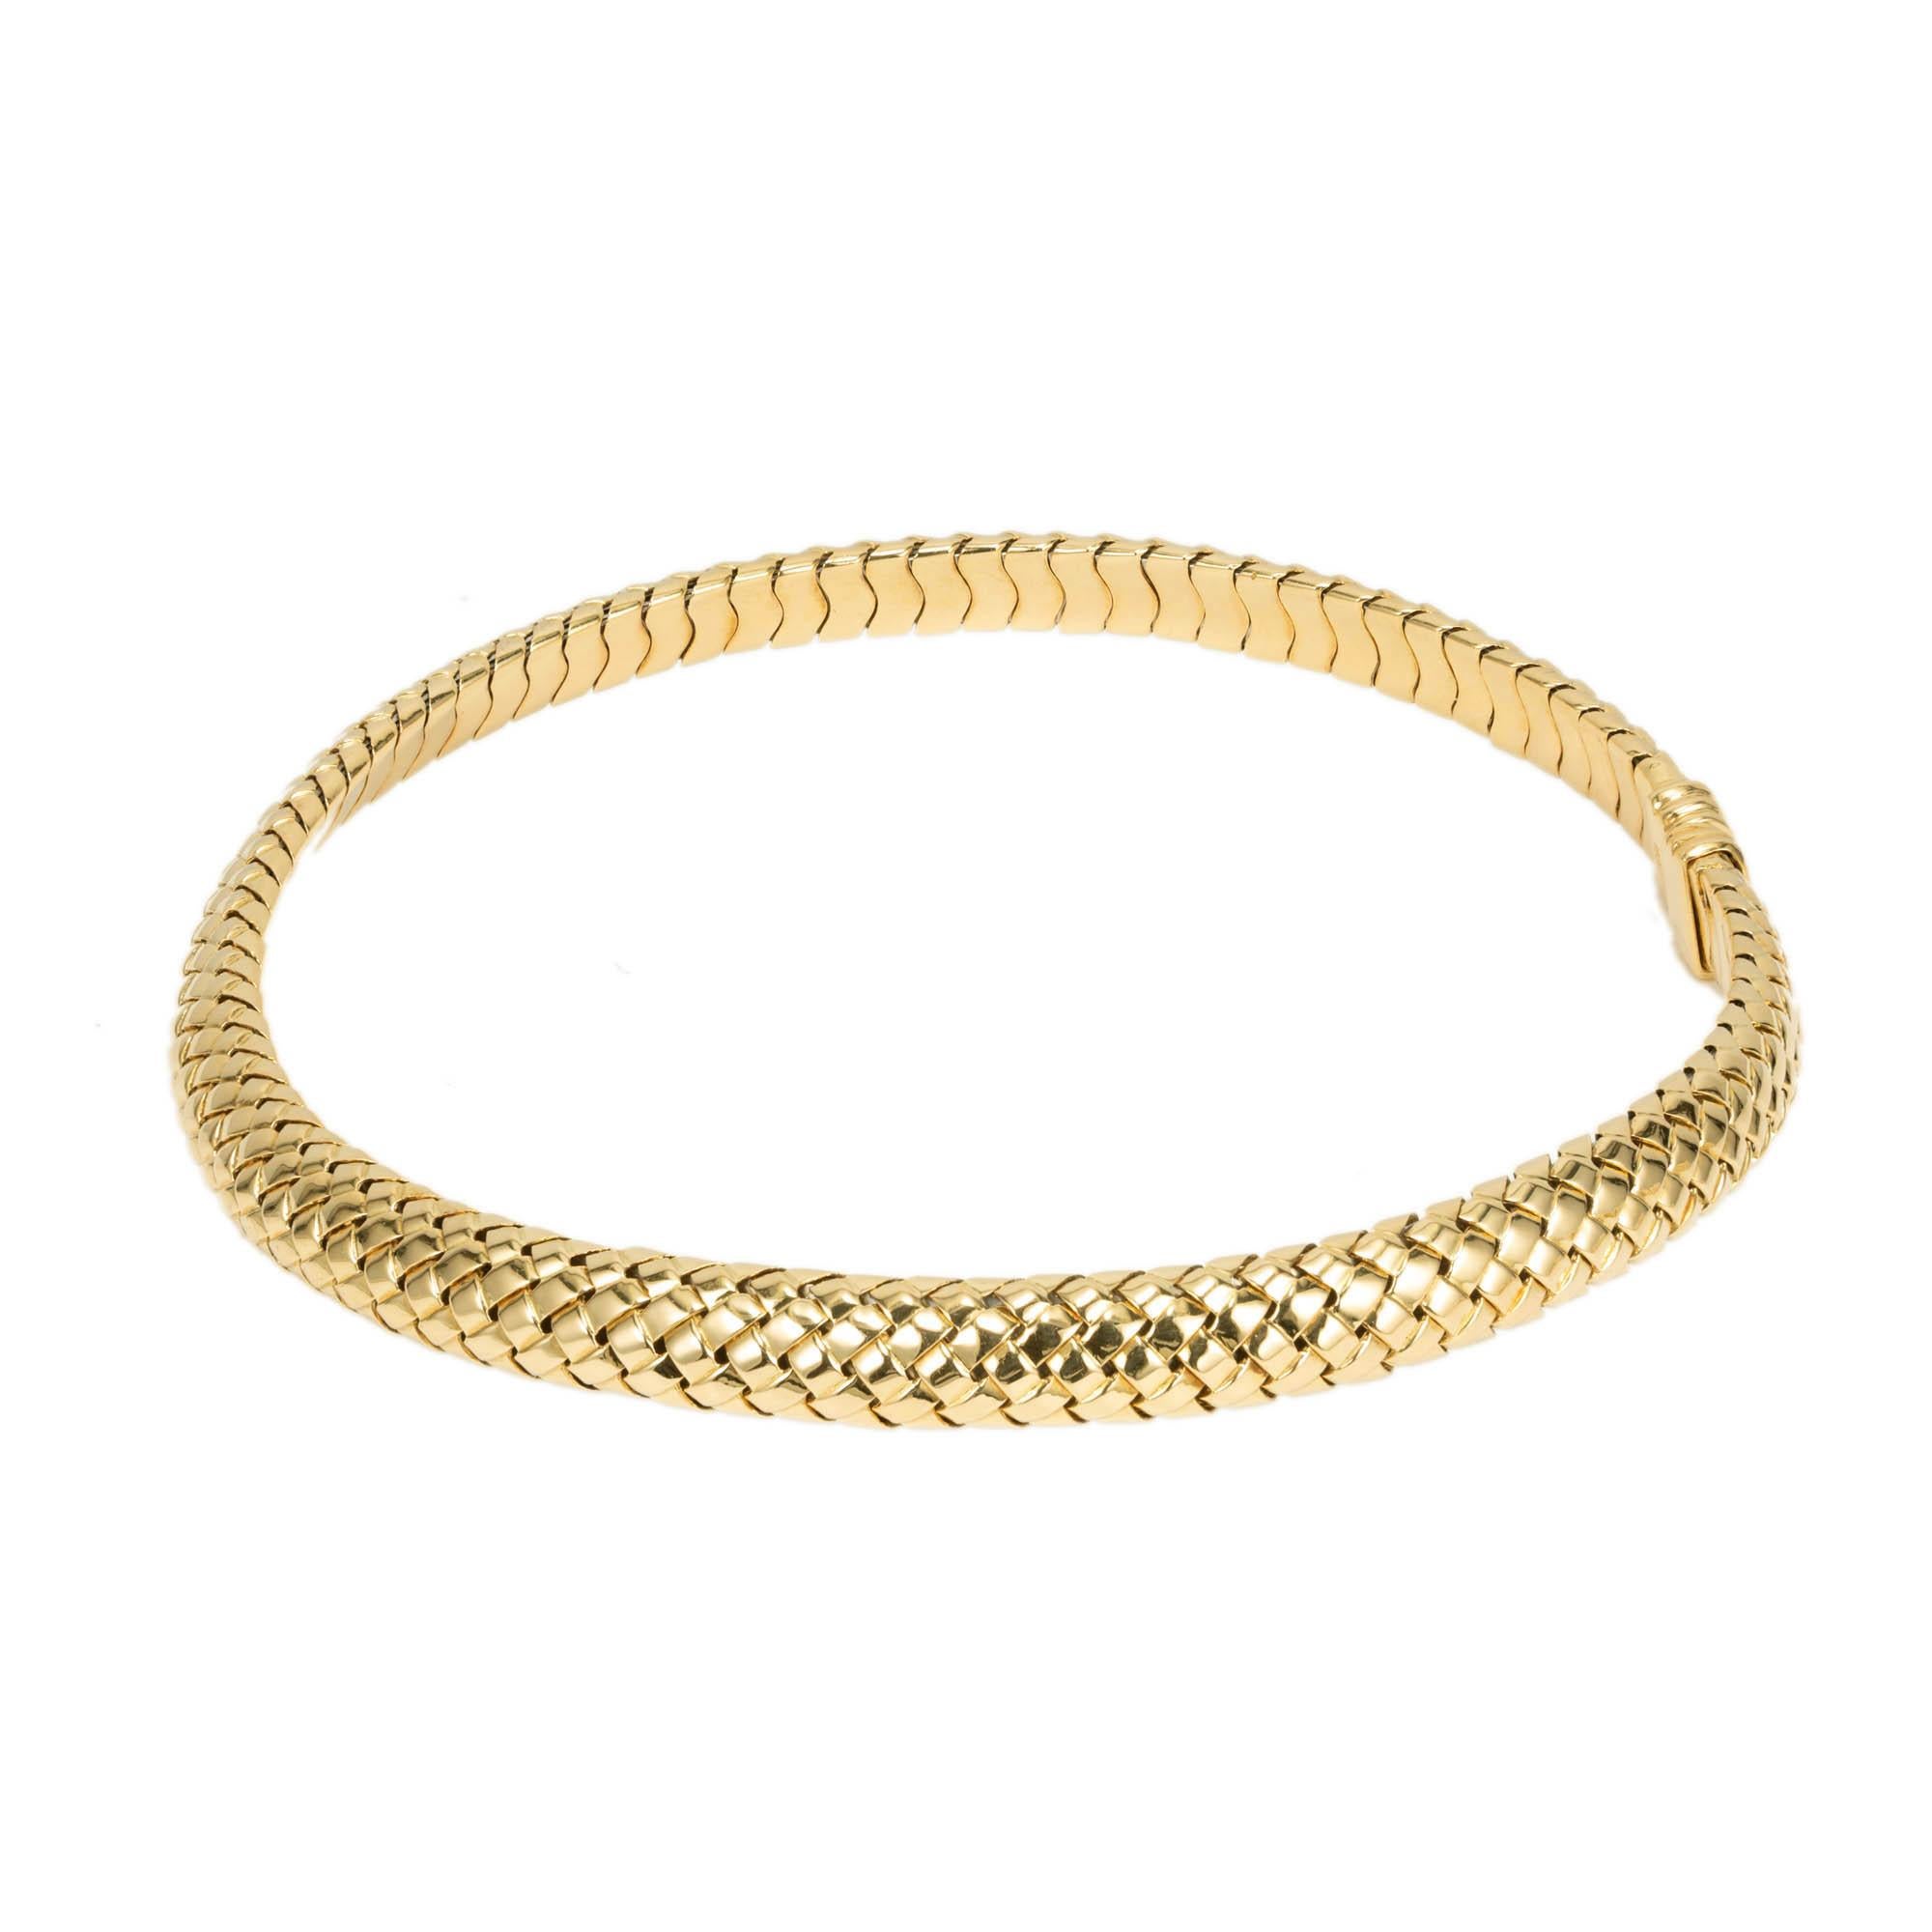 Tiffany & Co mesh 18k gold woven neck choker. 1977 authentic Tiffany & Co. Spring open at the end to fit a 16 inch neck.

18k yellow gold
Tested: 18k
Stamped: 750
Hallmark: 1977 Tiffany & Co
79.5 grams
Top to bottom: 10mm or .40 inch
Depth: 4.5mm